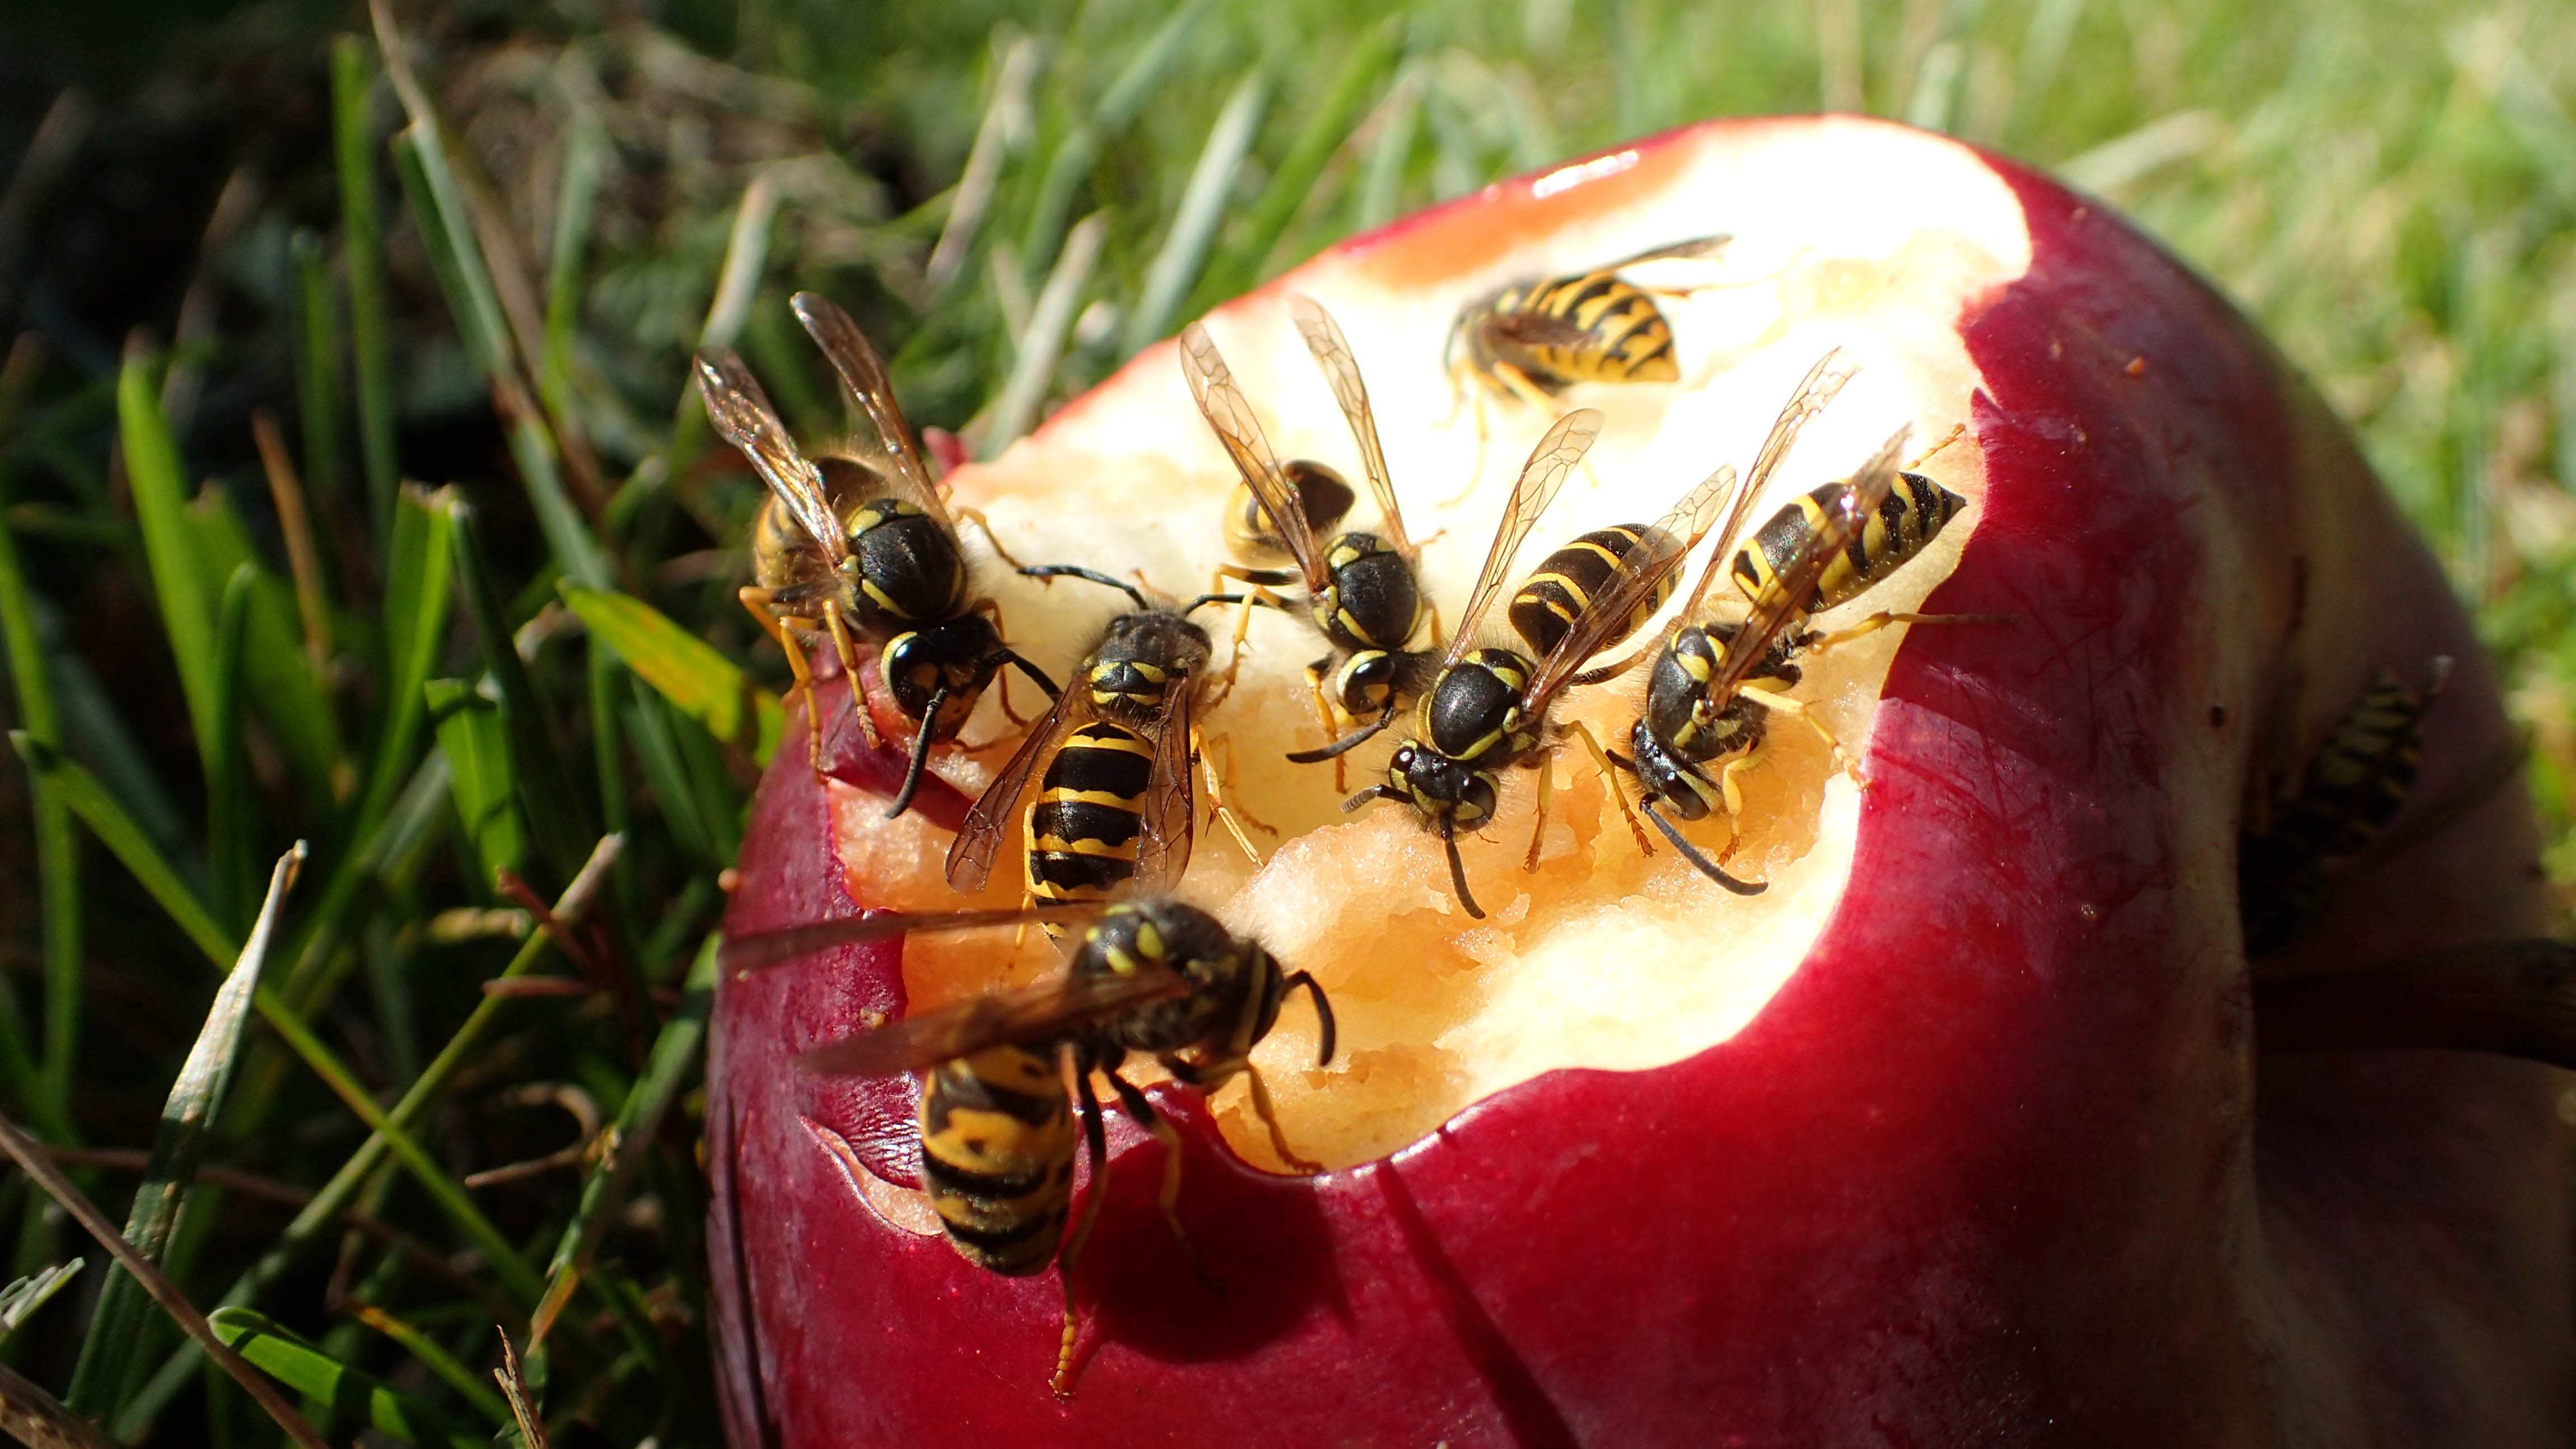 Wasps eating a red apple